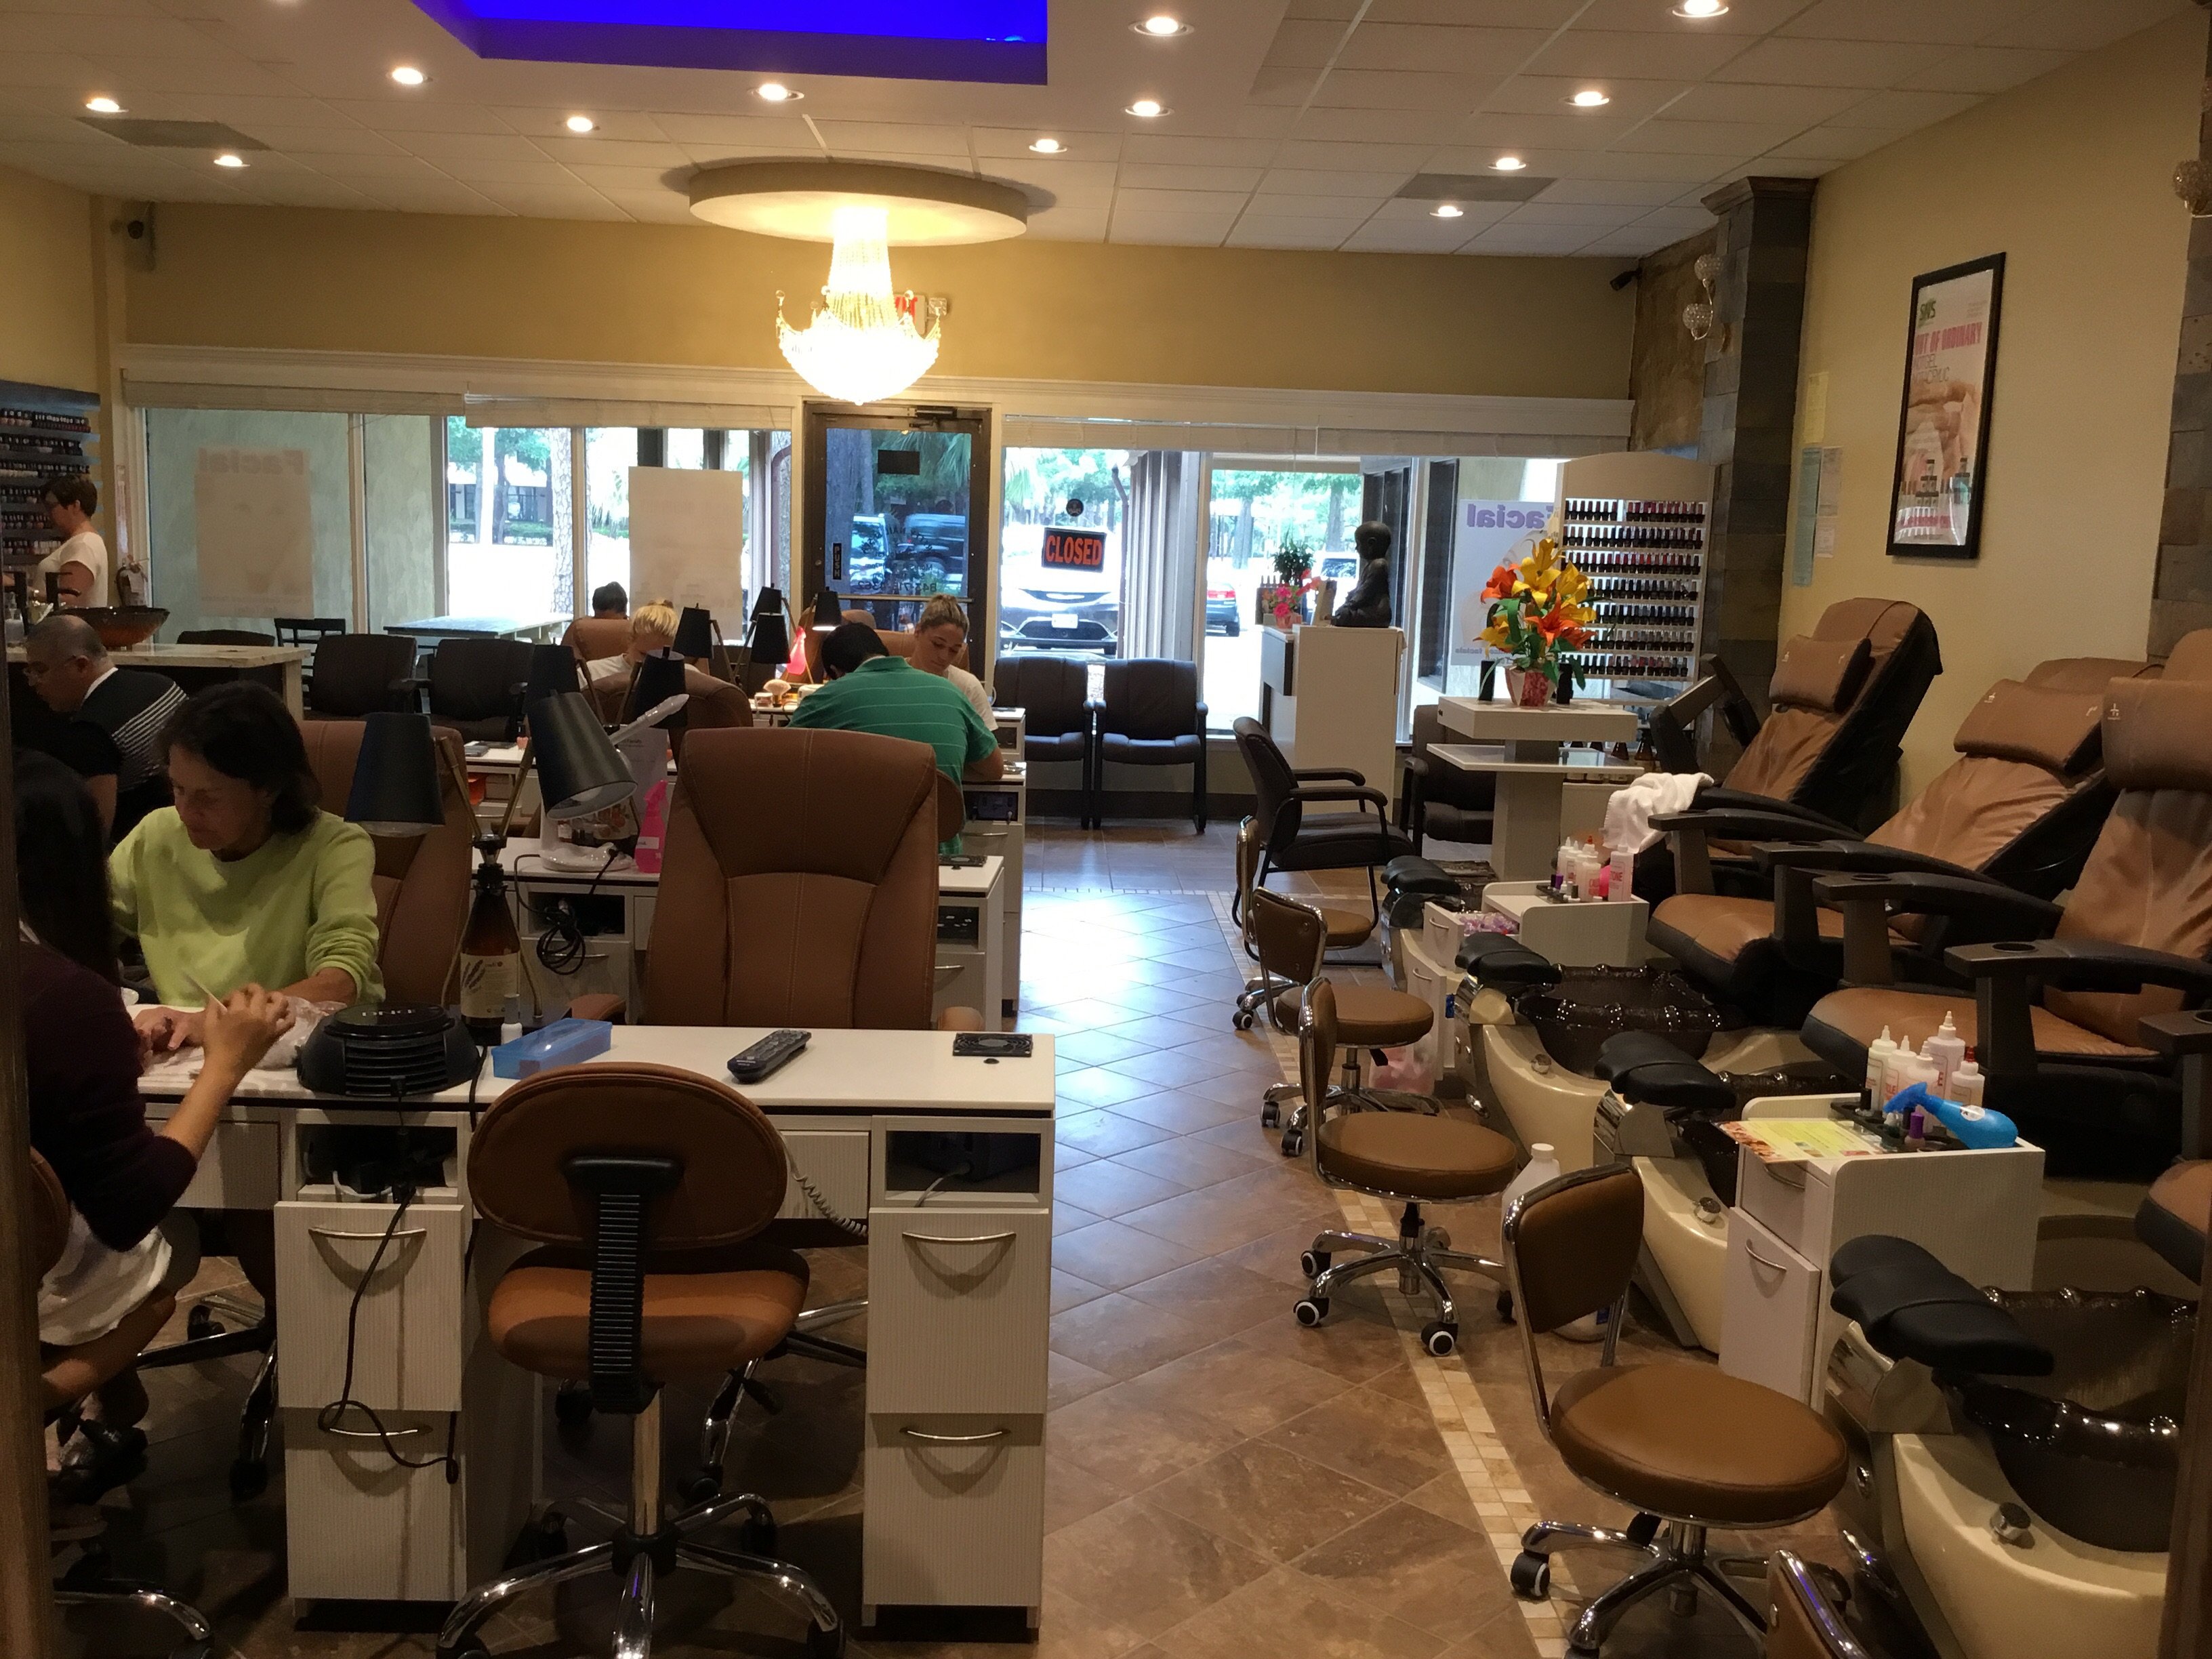 The 10 Best Nail Salons in South Carolina!